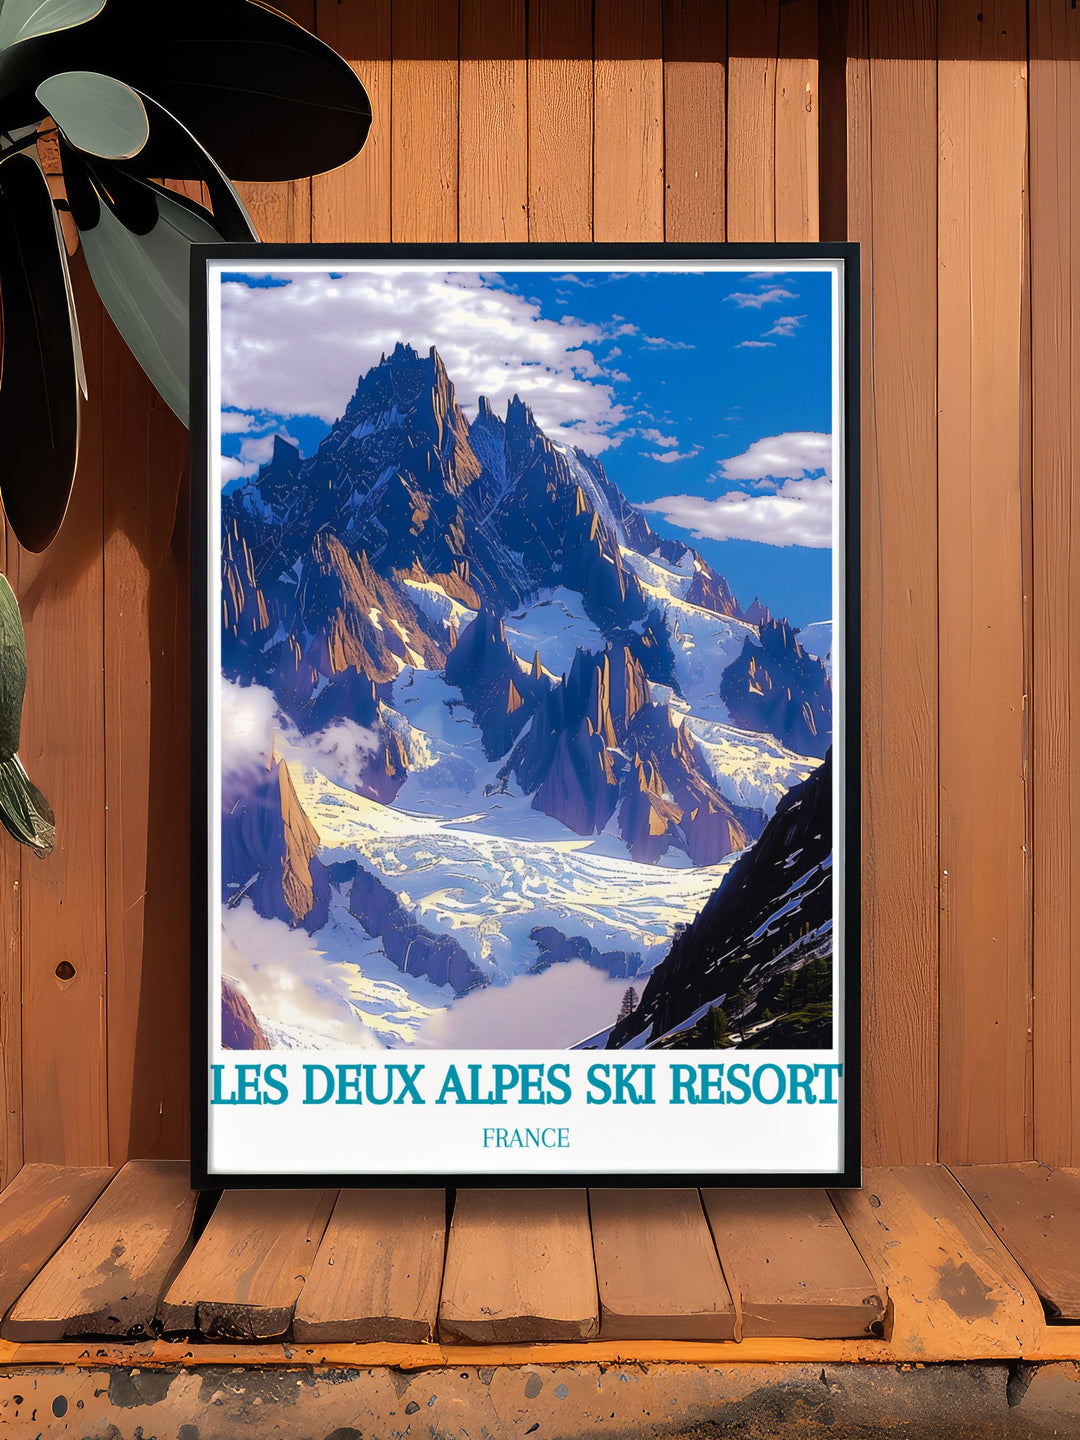 Highlighting the beauty of La Meijes imposing peaks, this poster offers a stunning visual representation of one of the French Alps most iconic mountains, ideal for mountaineers and nature lovers.